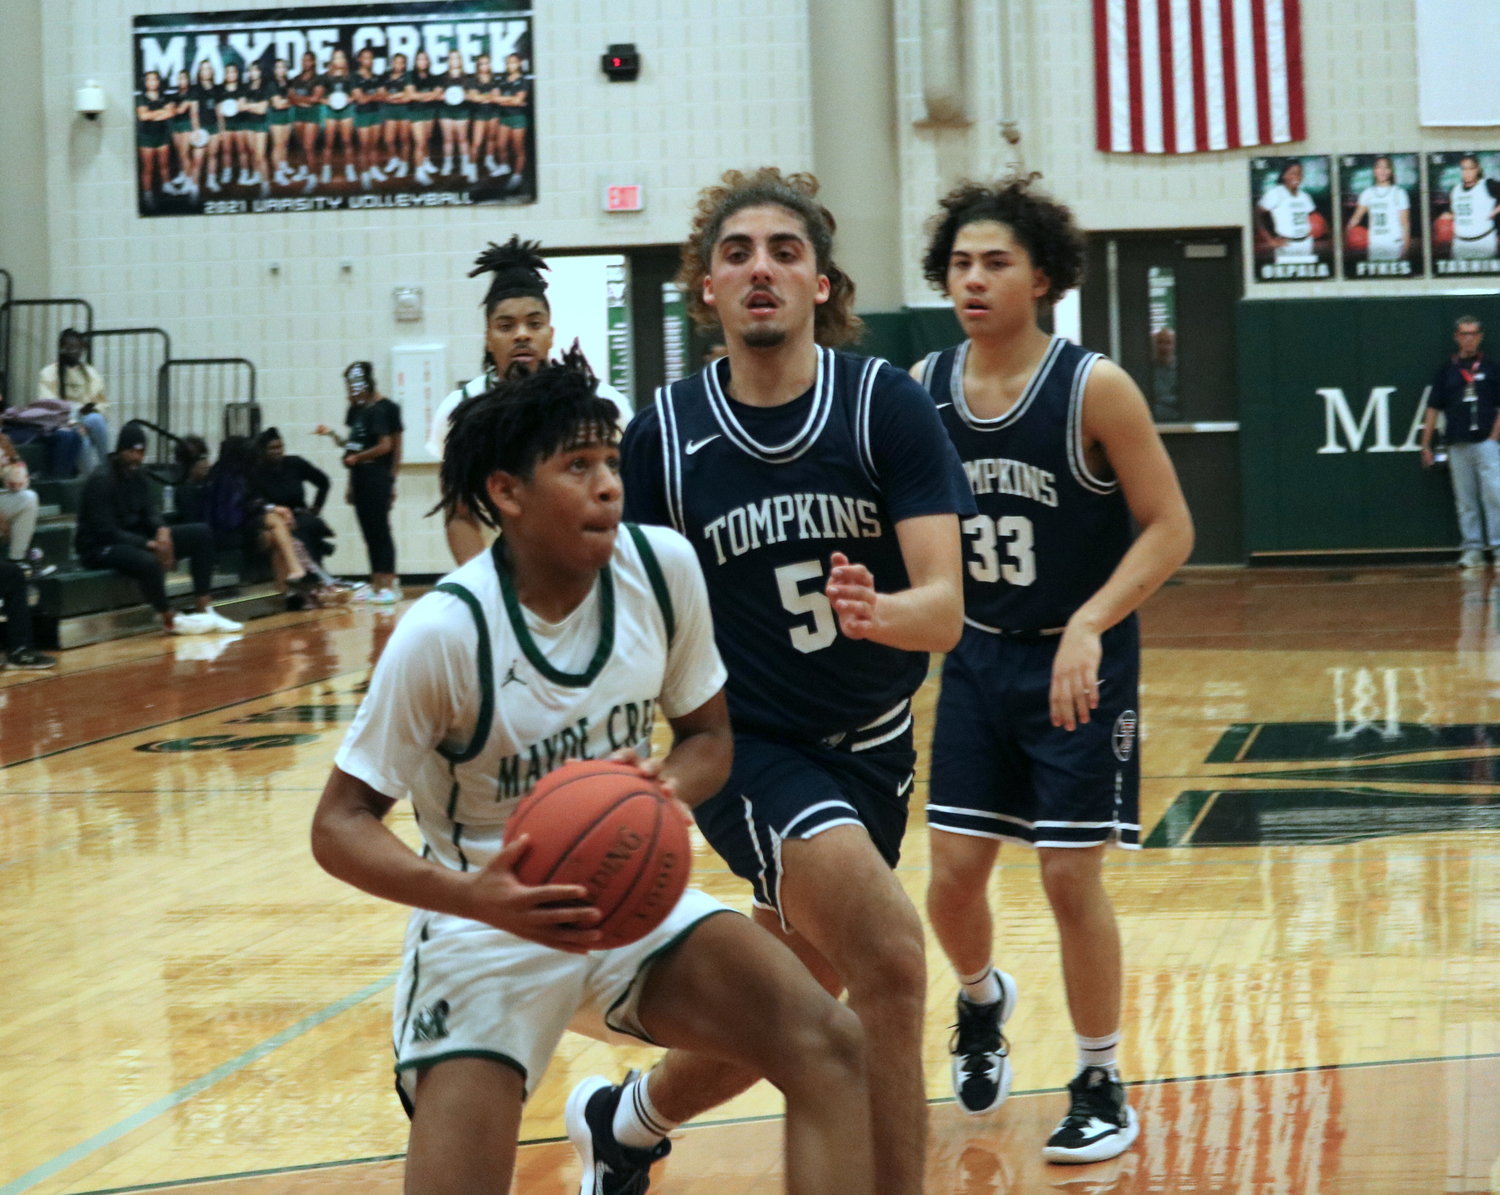 Larison Lamette drives to the lane during Wednesday’s game between Mayde Creek and Tompkins at the Mayde Creek gym.